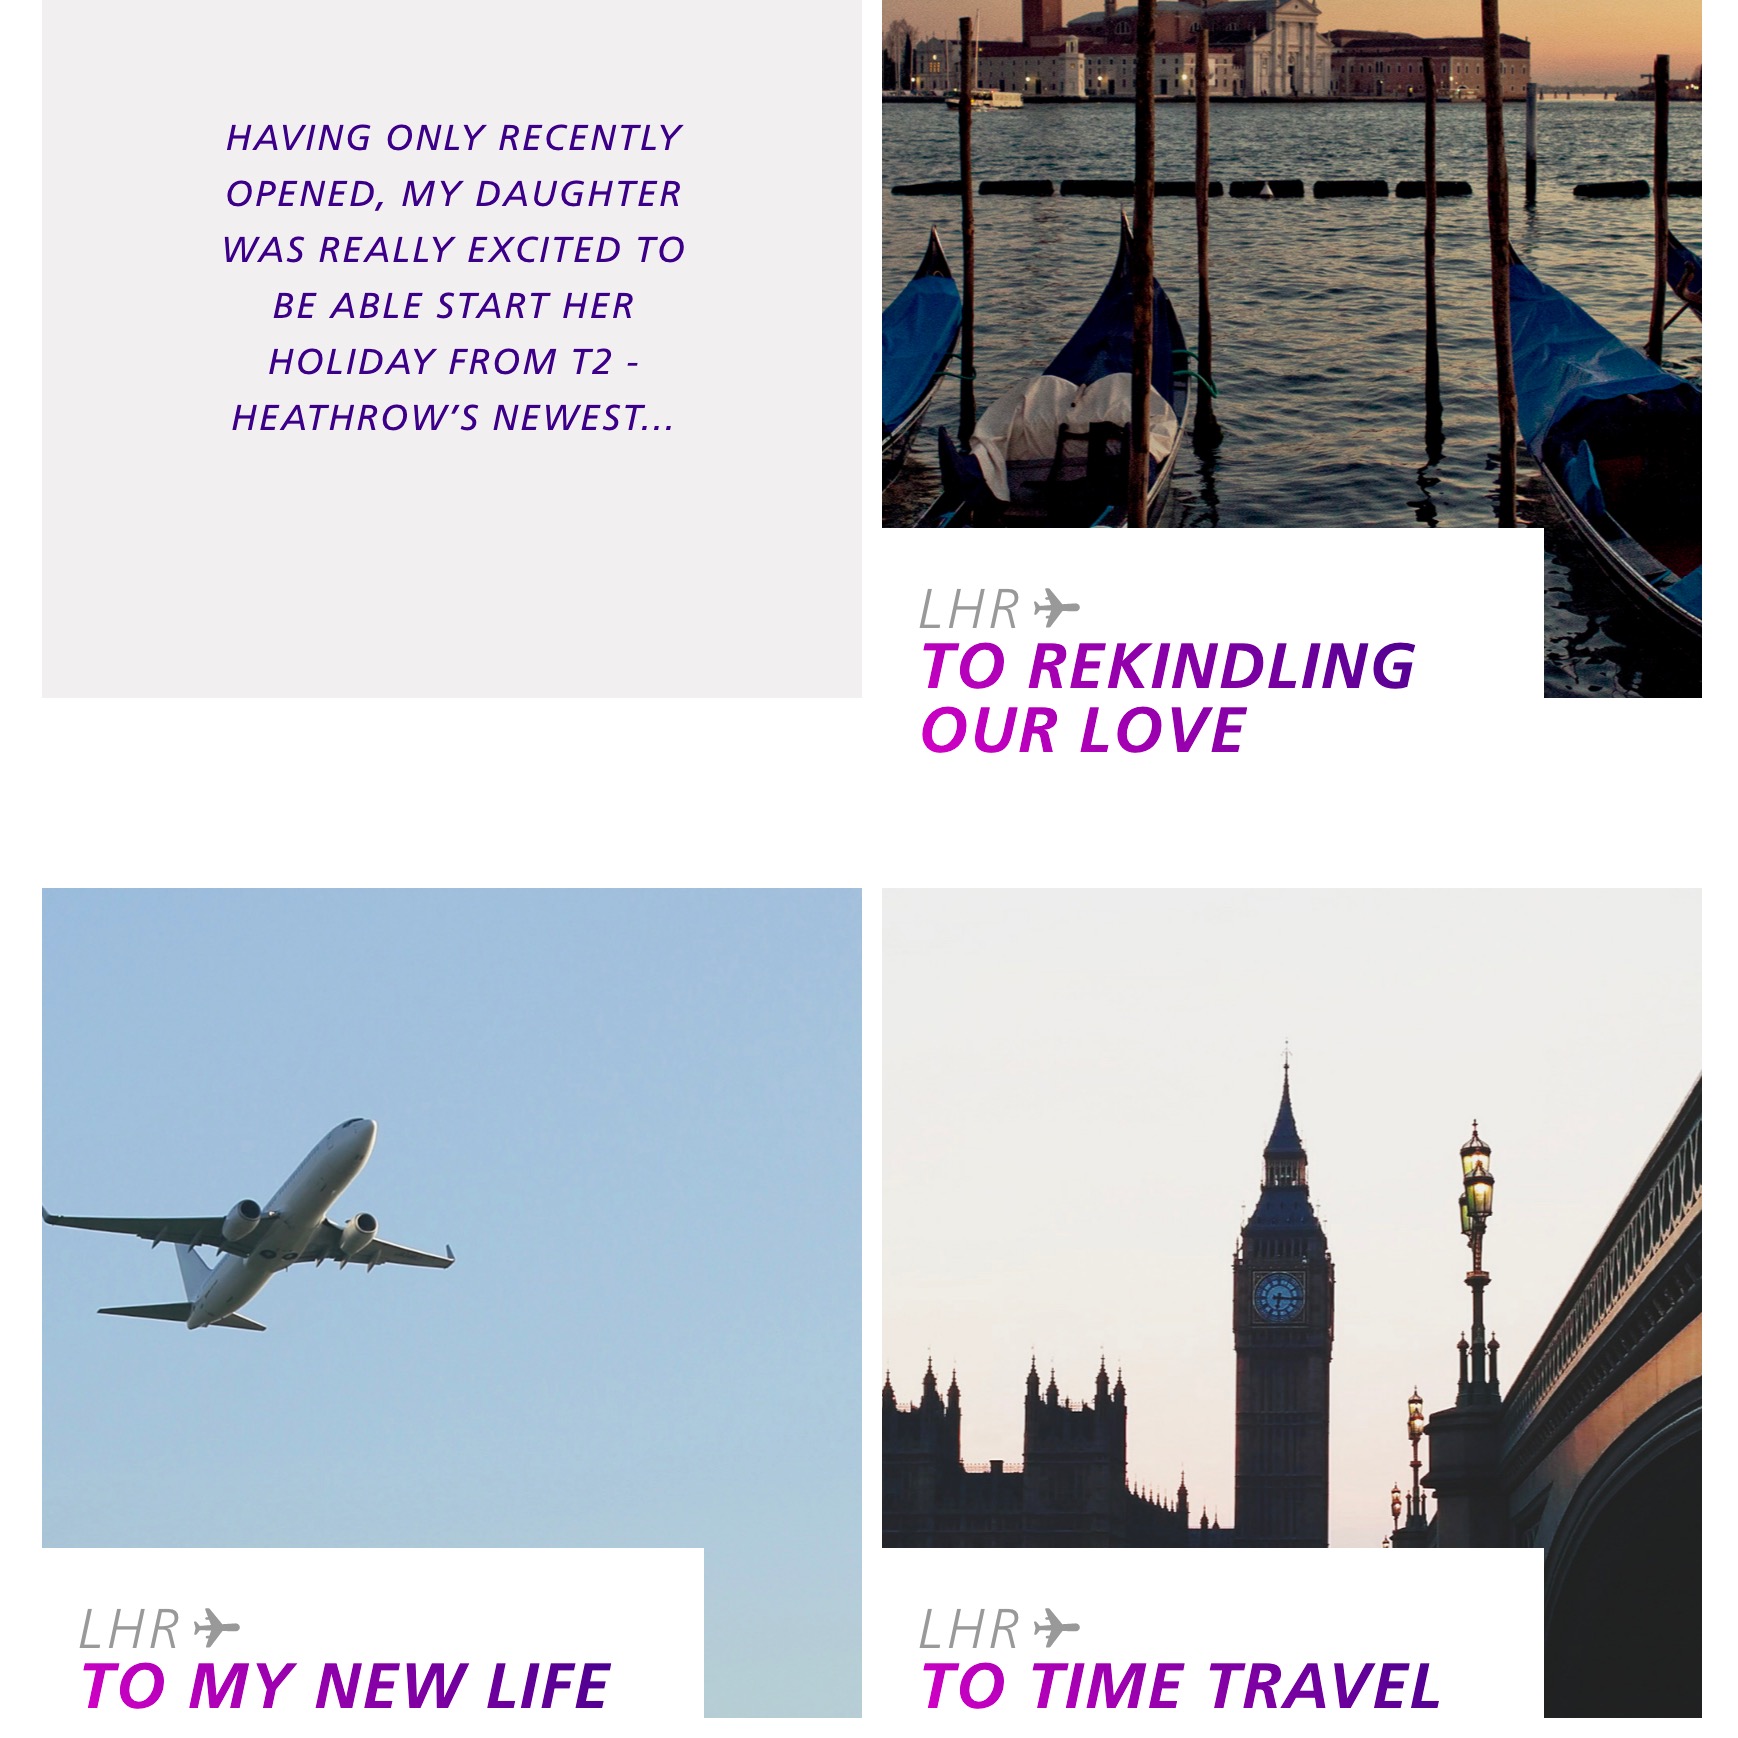 Collage of marketing materials for LHR